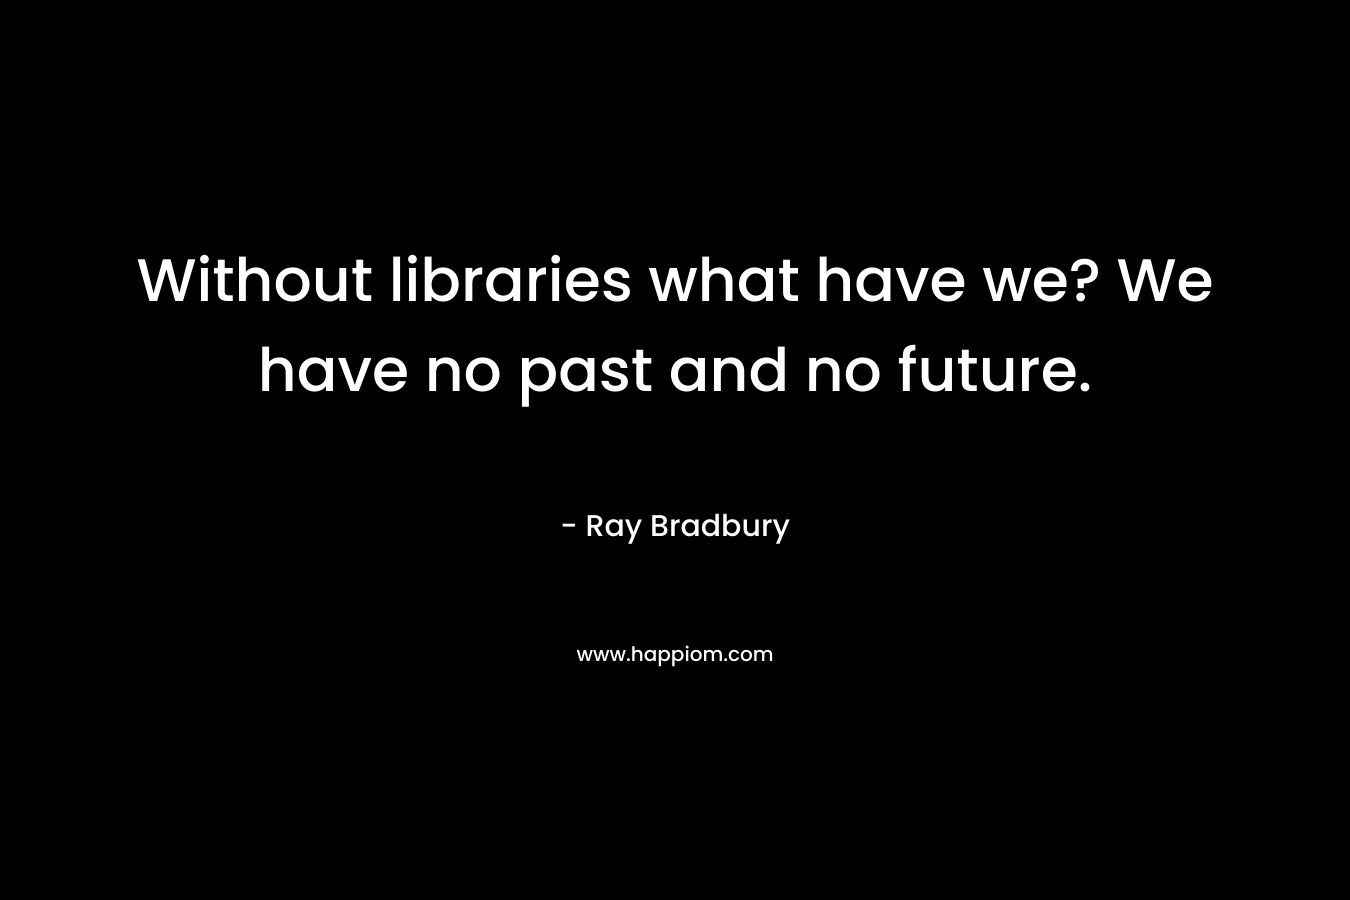 Without libraries what have we? We have no past and no future.